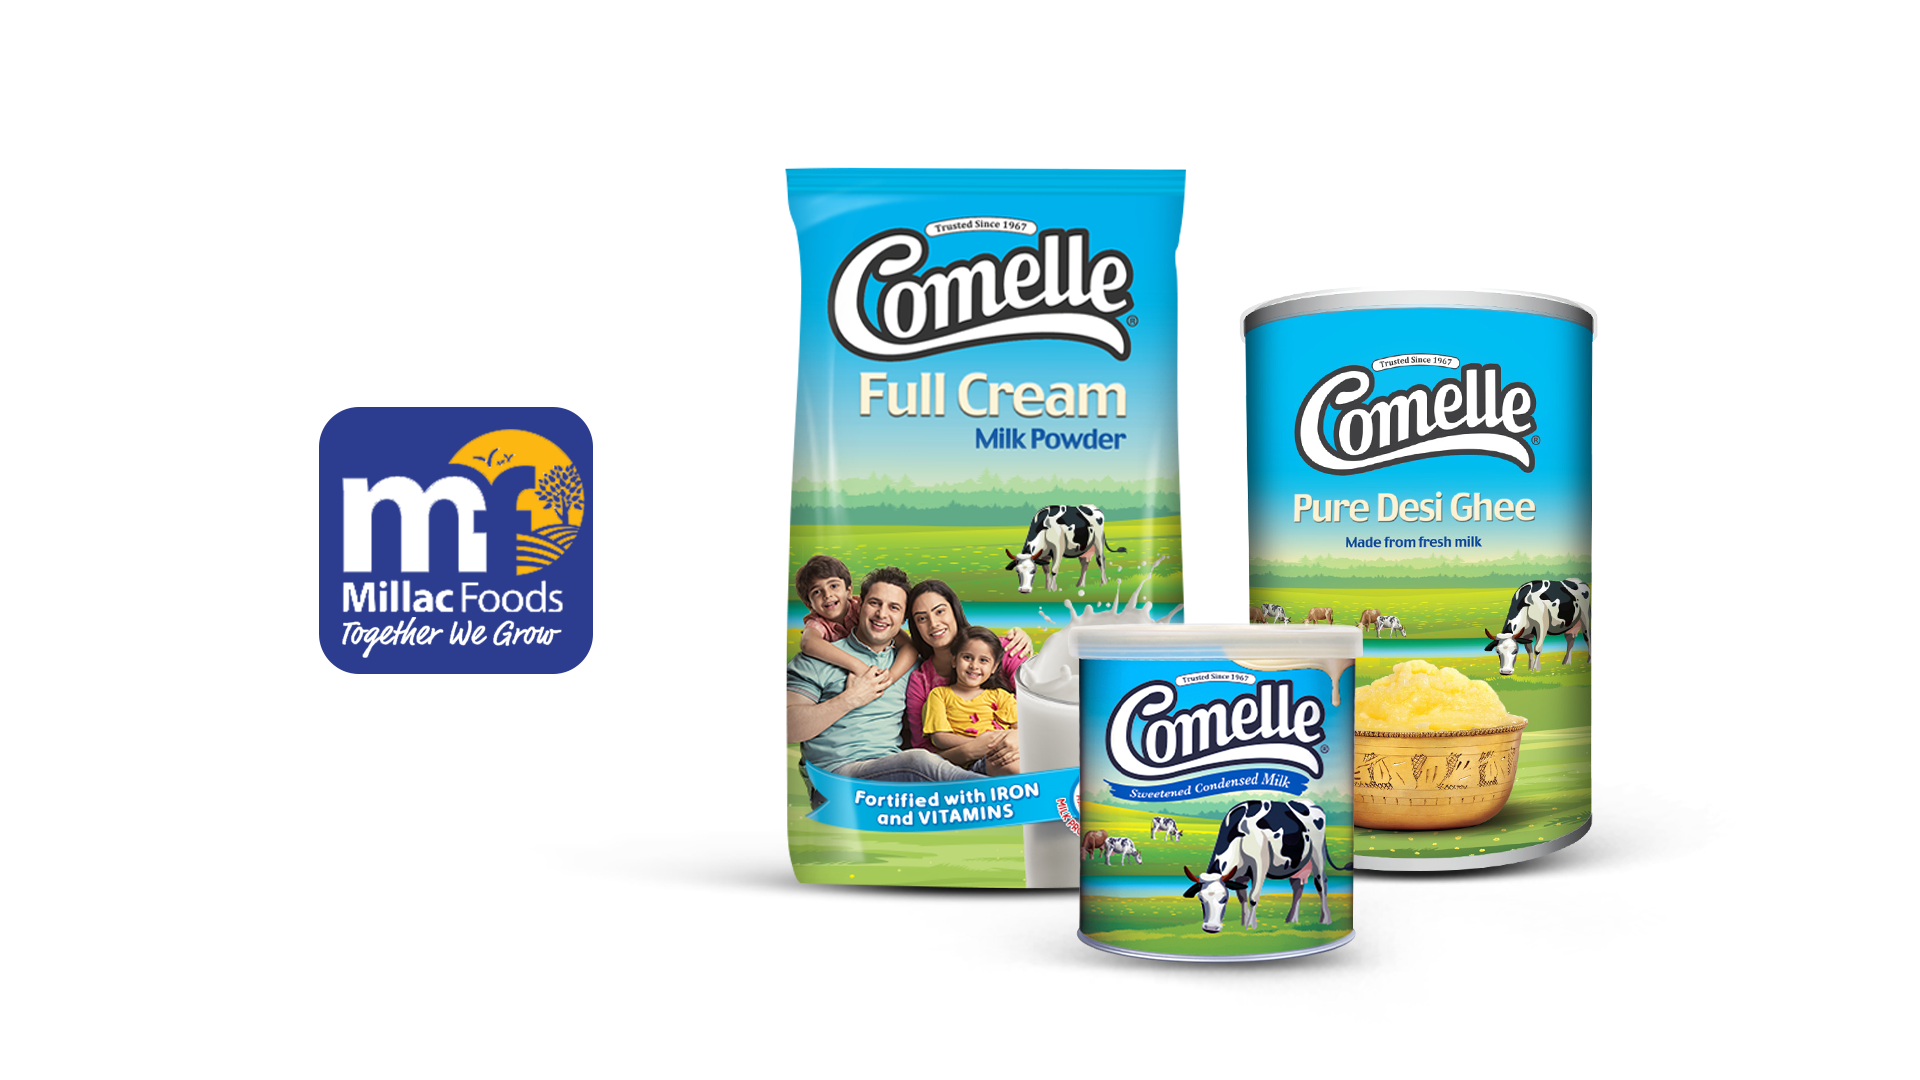 Comelle: A Legacy of Excellence in Pakistan's Dairy Industry